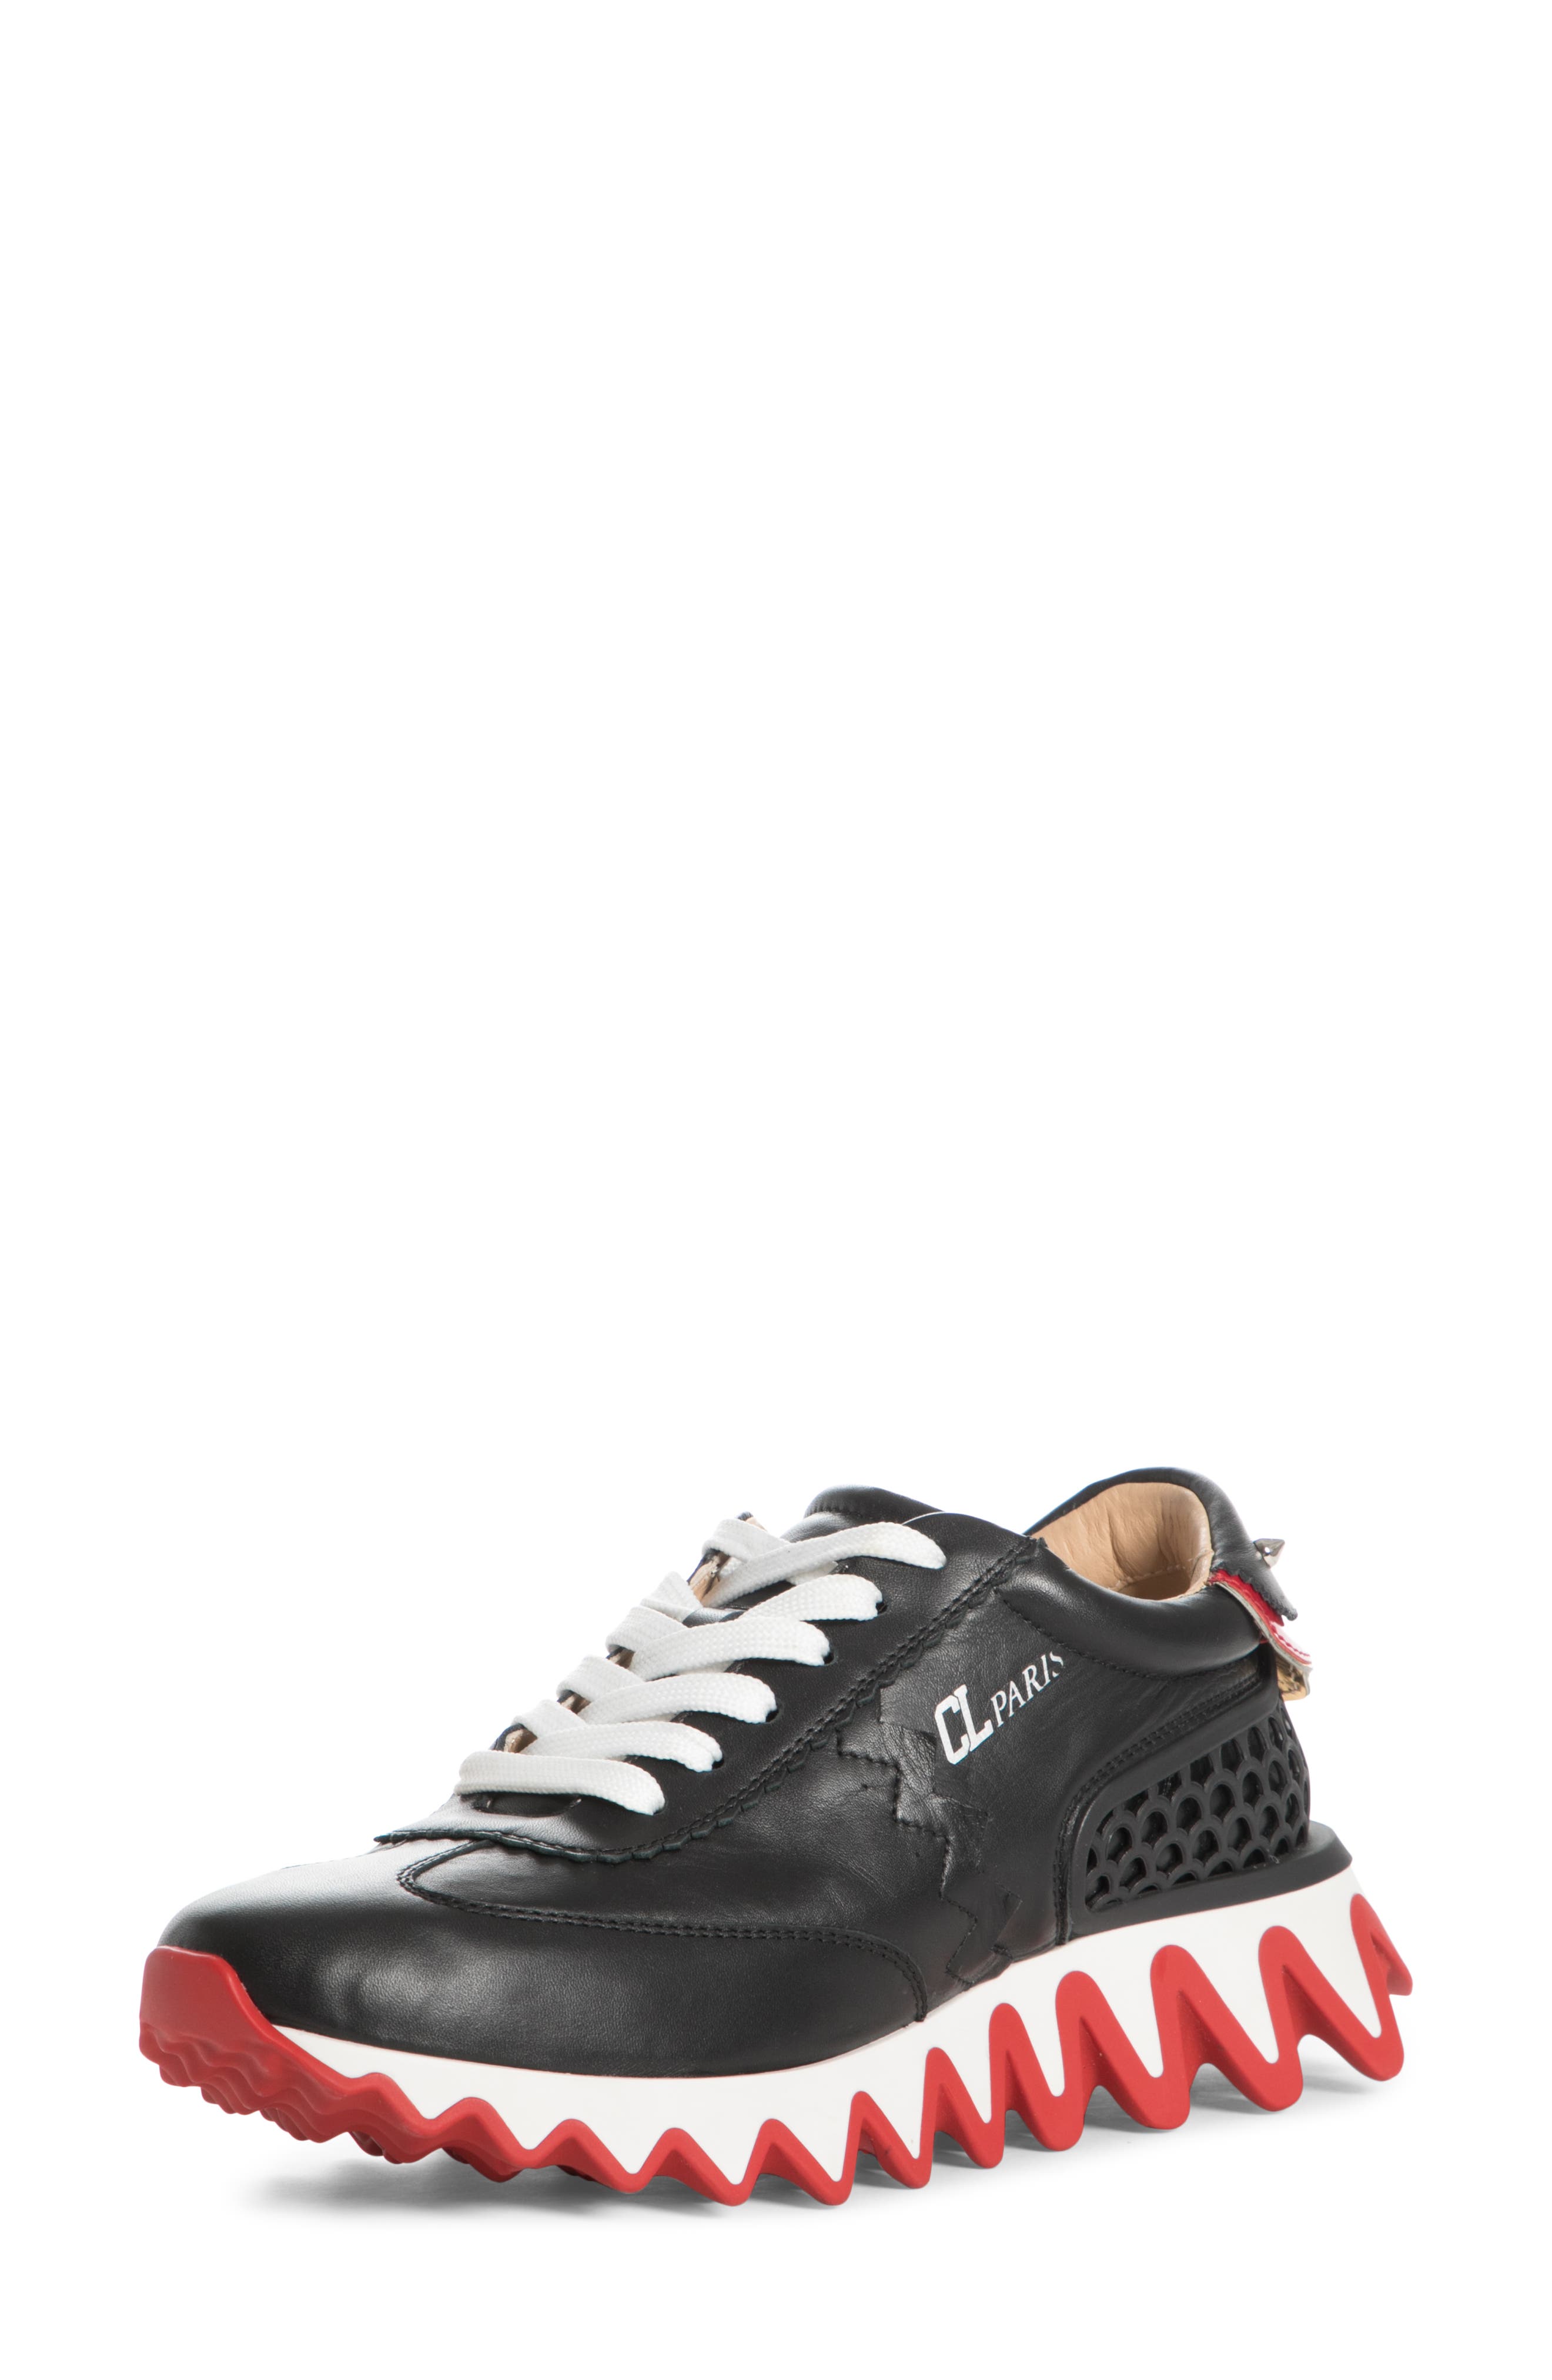 Christian Louboutin Loubishark Sneaker in Black/Red at Nordstrom, Size 5.5Us